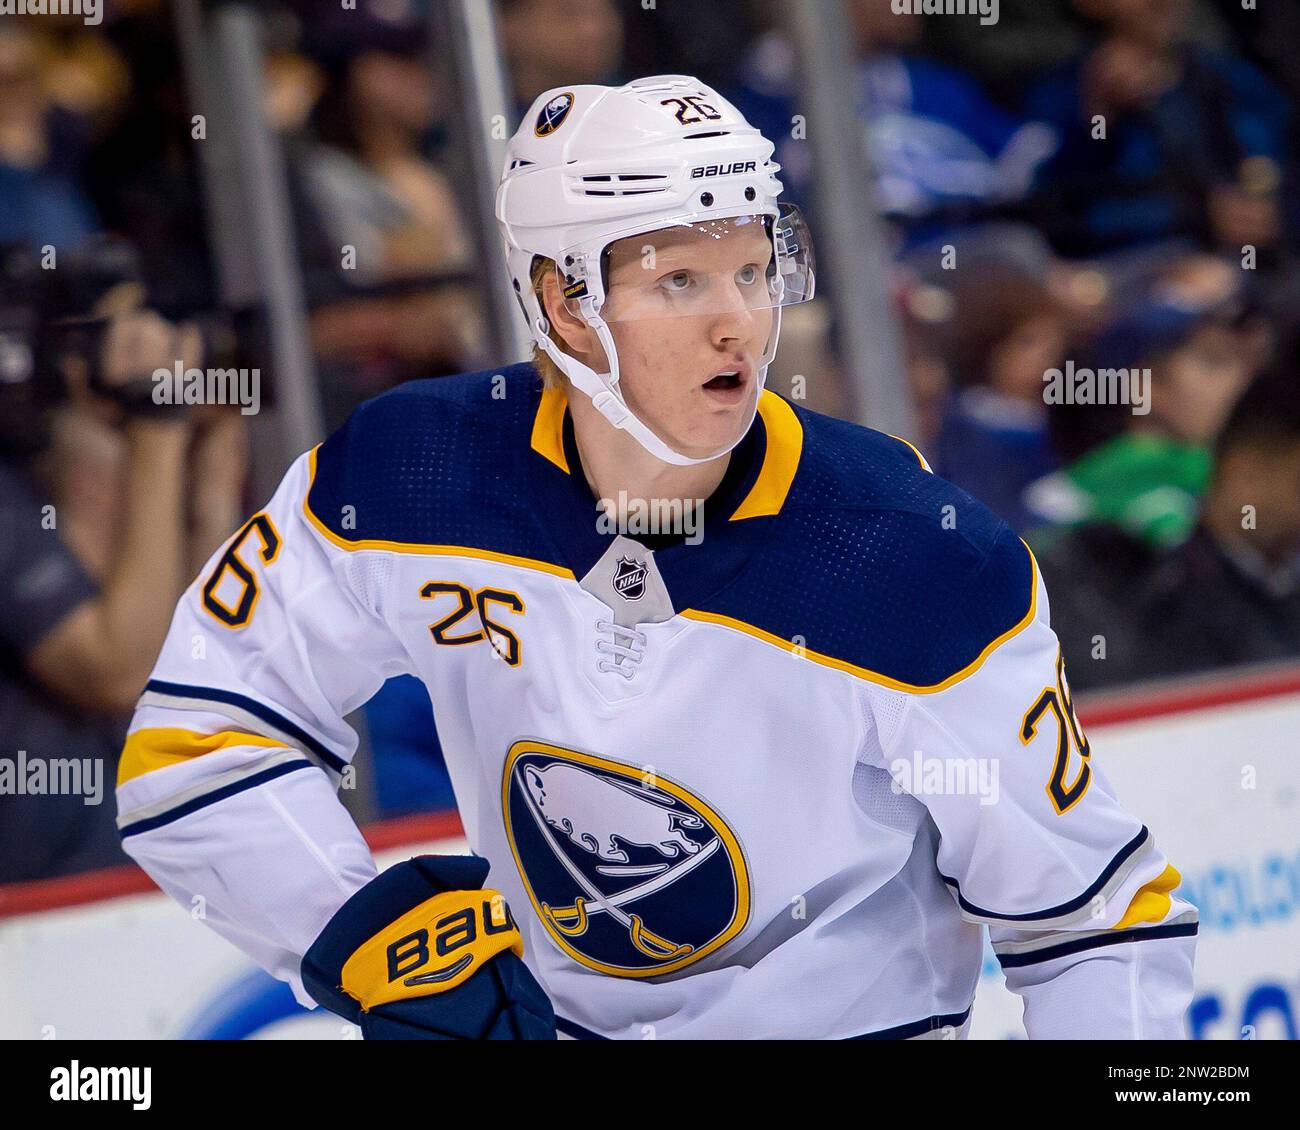 January 18, 2019: Sabres defenseman Rasmus Dahlin (26) in game action  during the NHL game between the Buffalo Sabres and the Vancouver Canucks at  Rogers Arena in Vancouver, Canada. Dom Gagne/CSM(Credit Image: ©